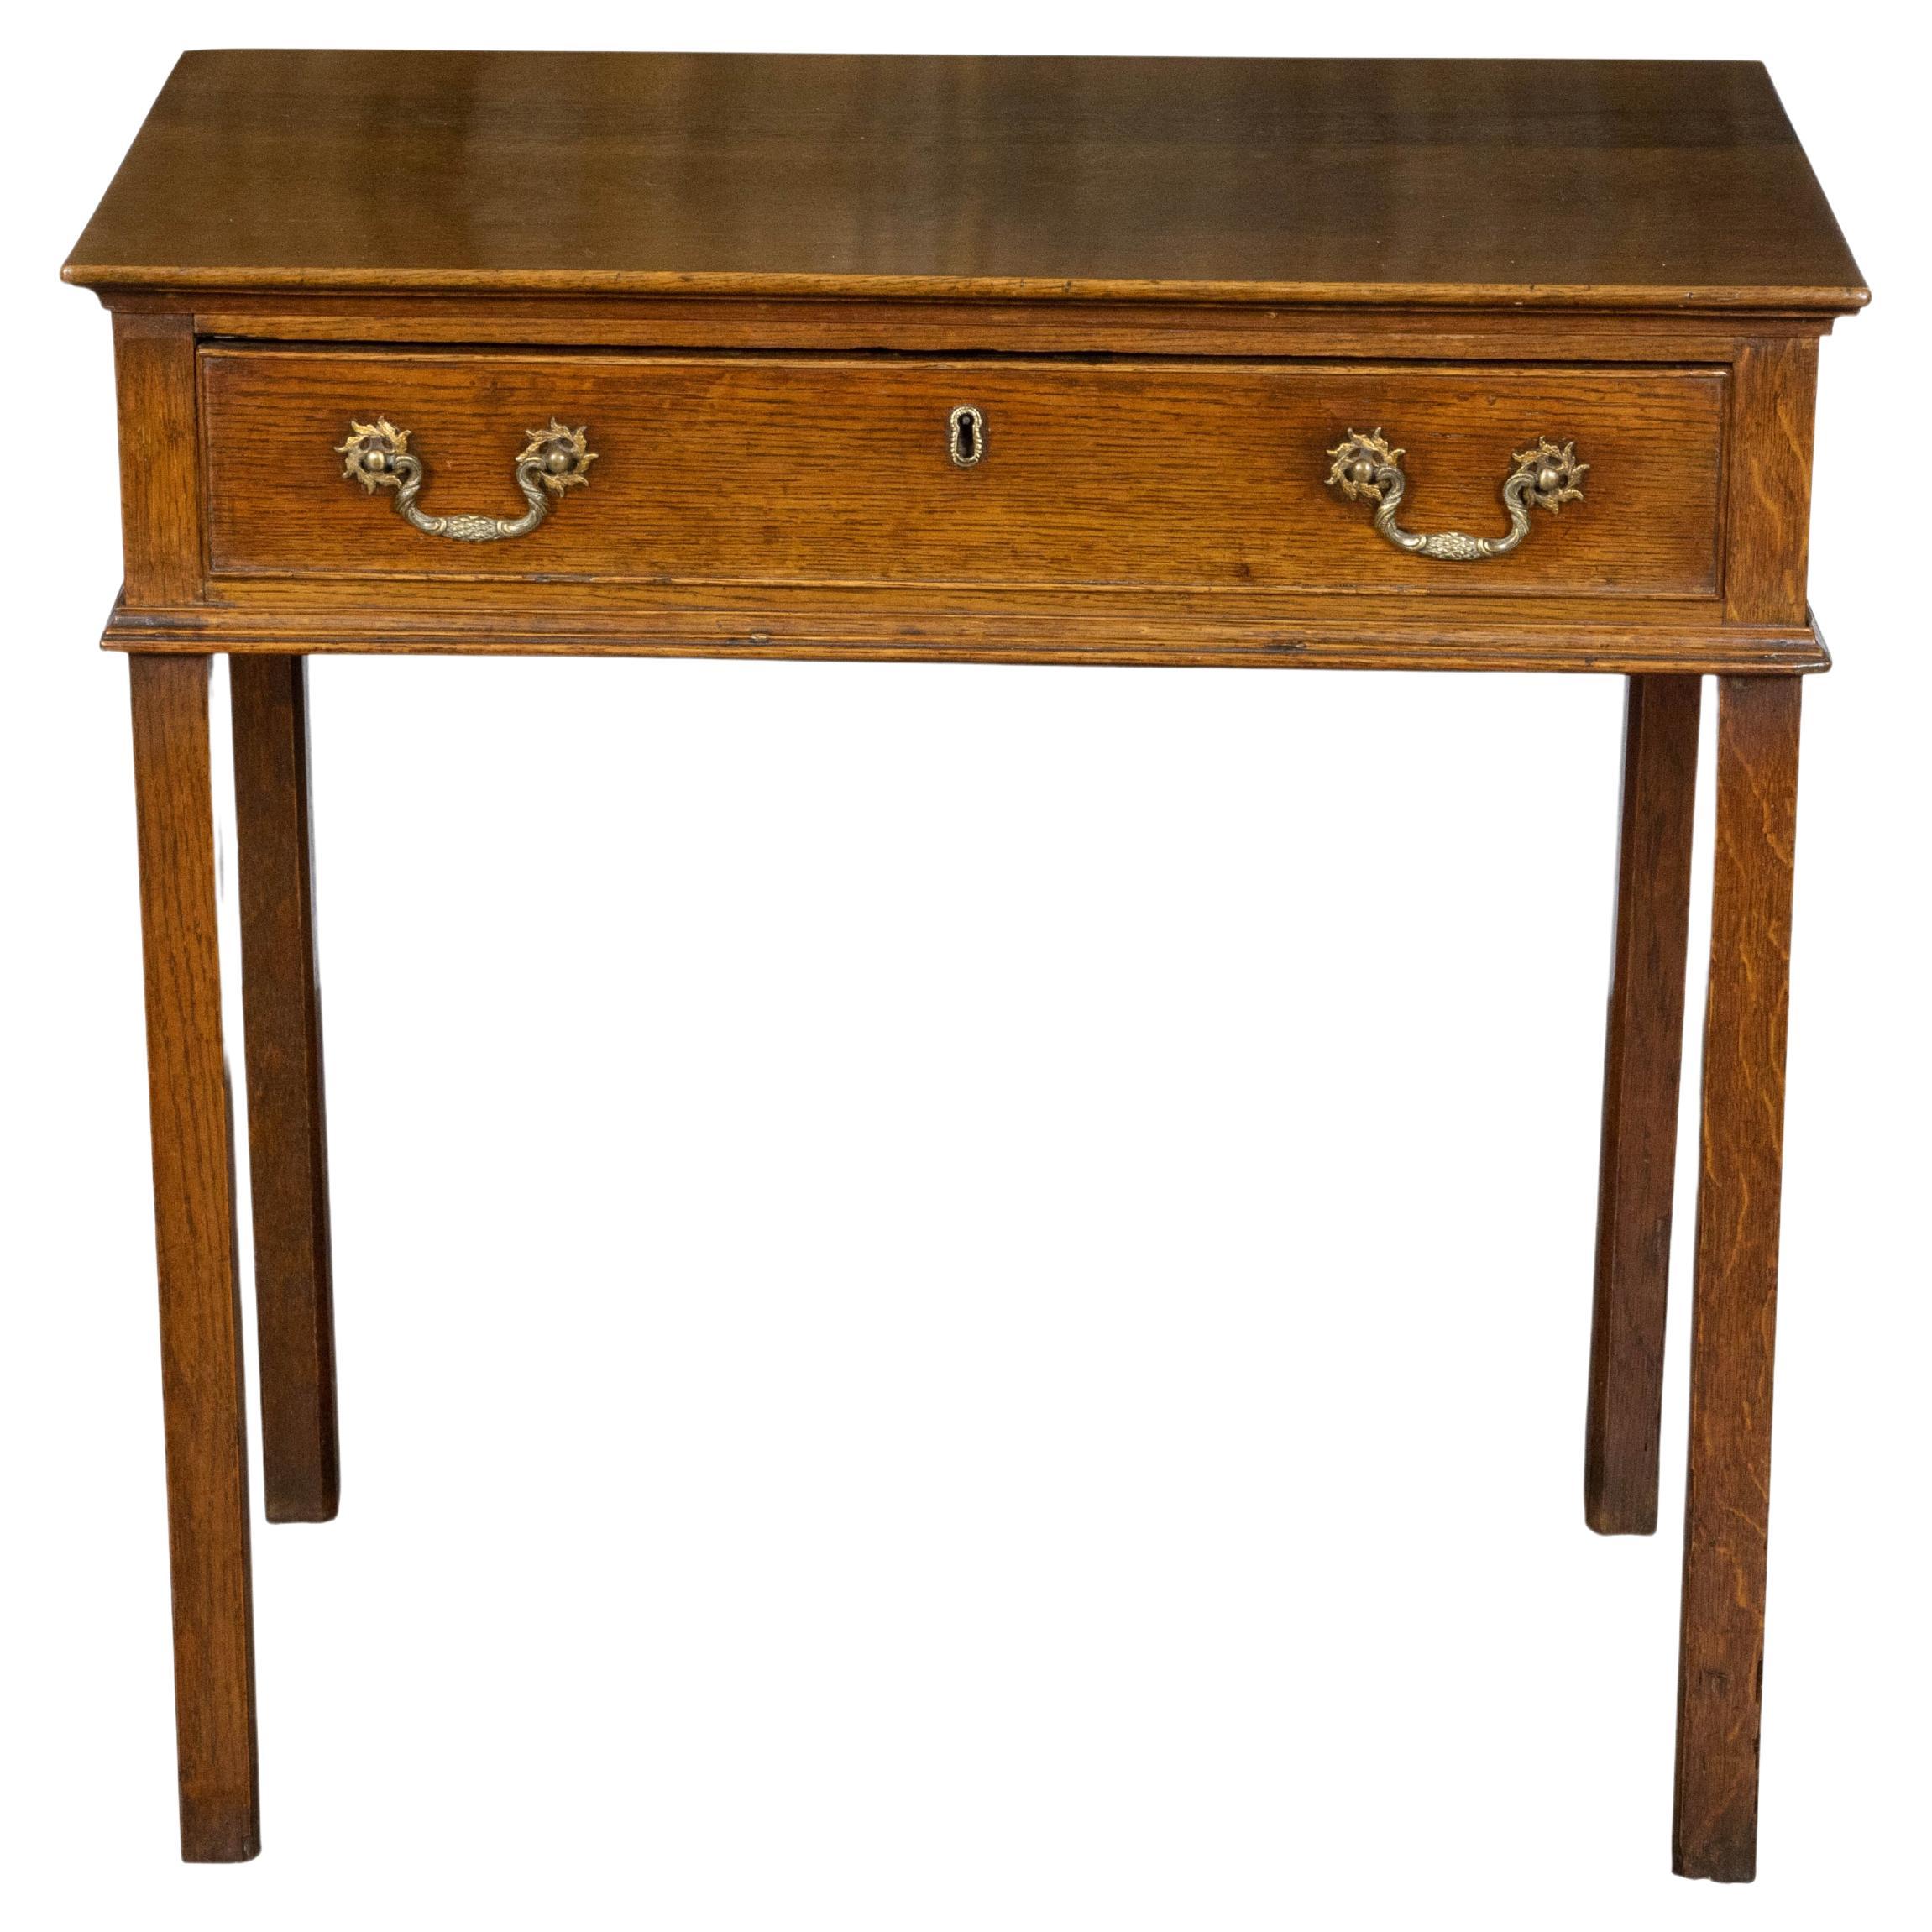 English Oak 1840s Side Table with Single Drawer and Ornate Hardware For Sale